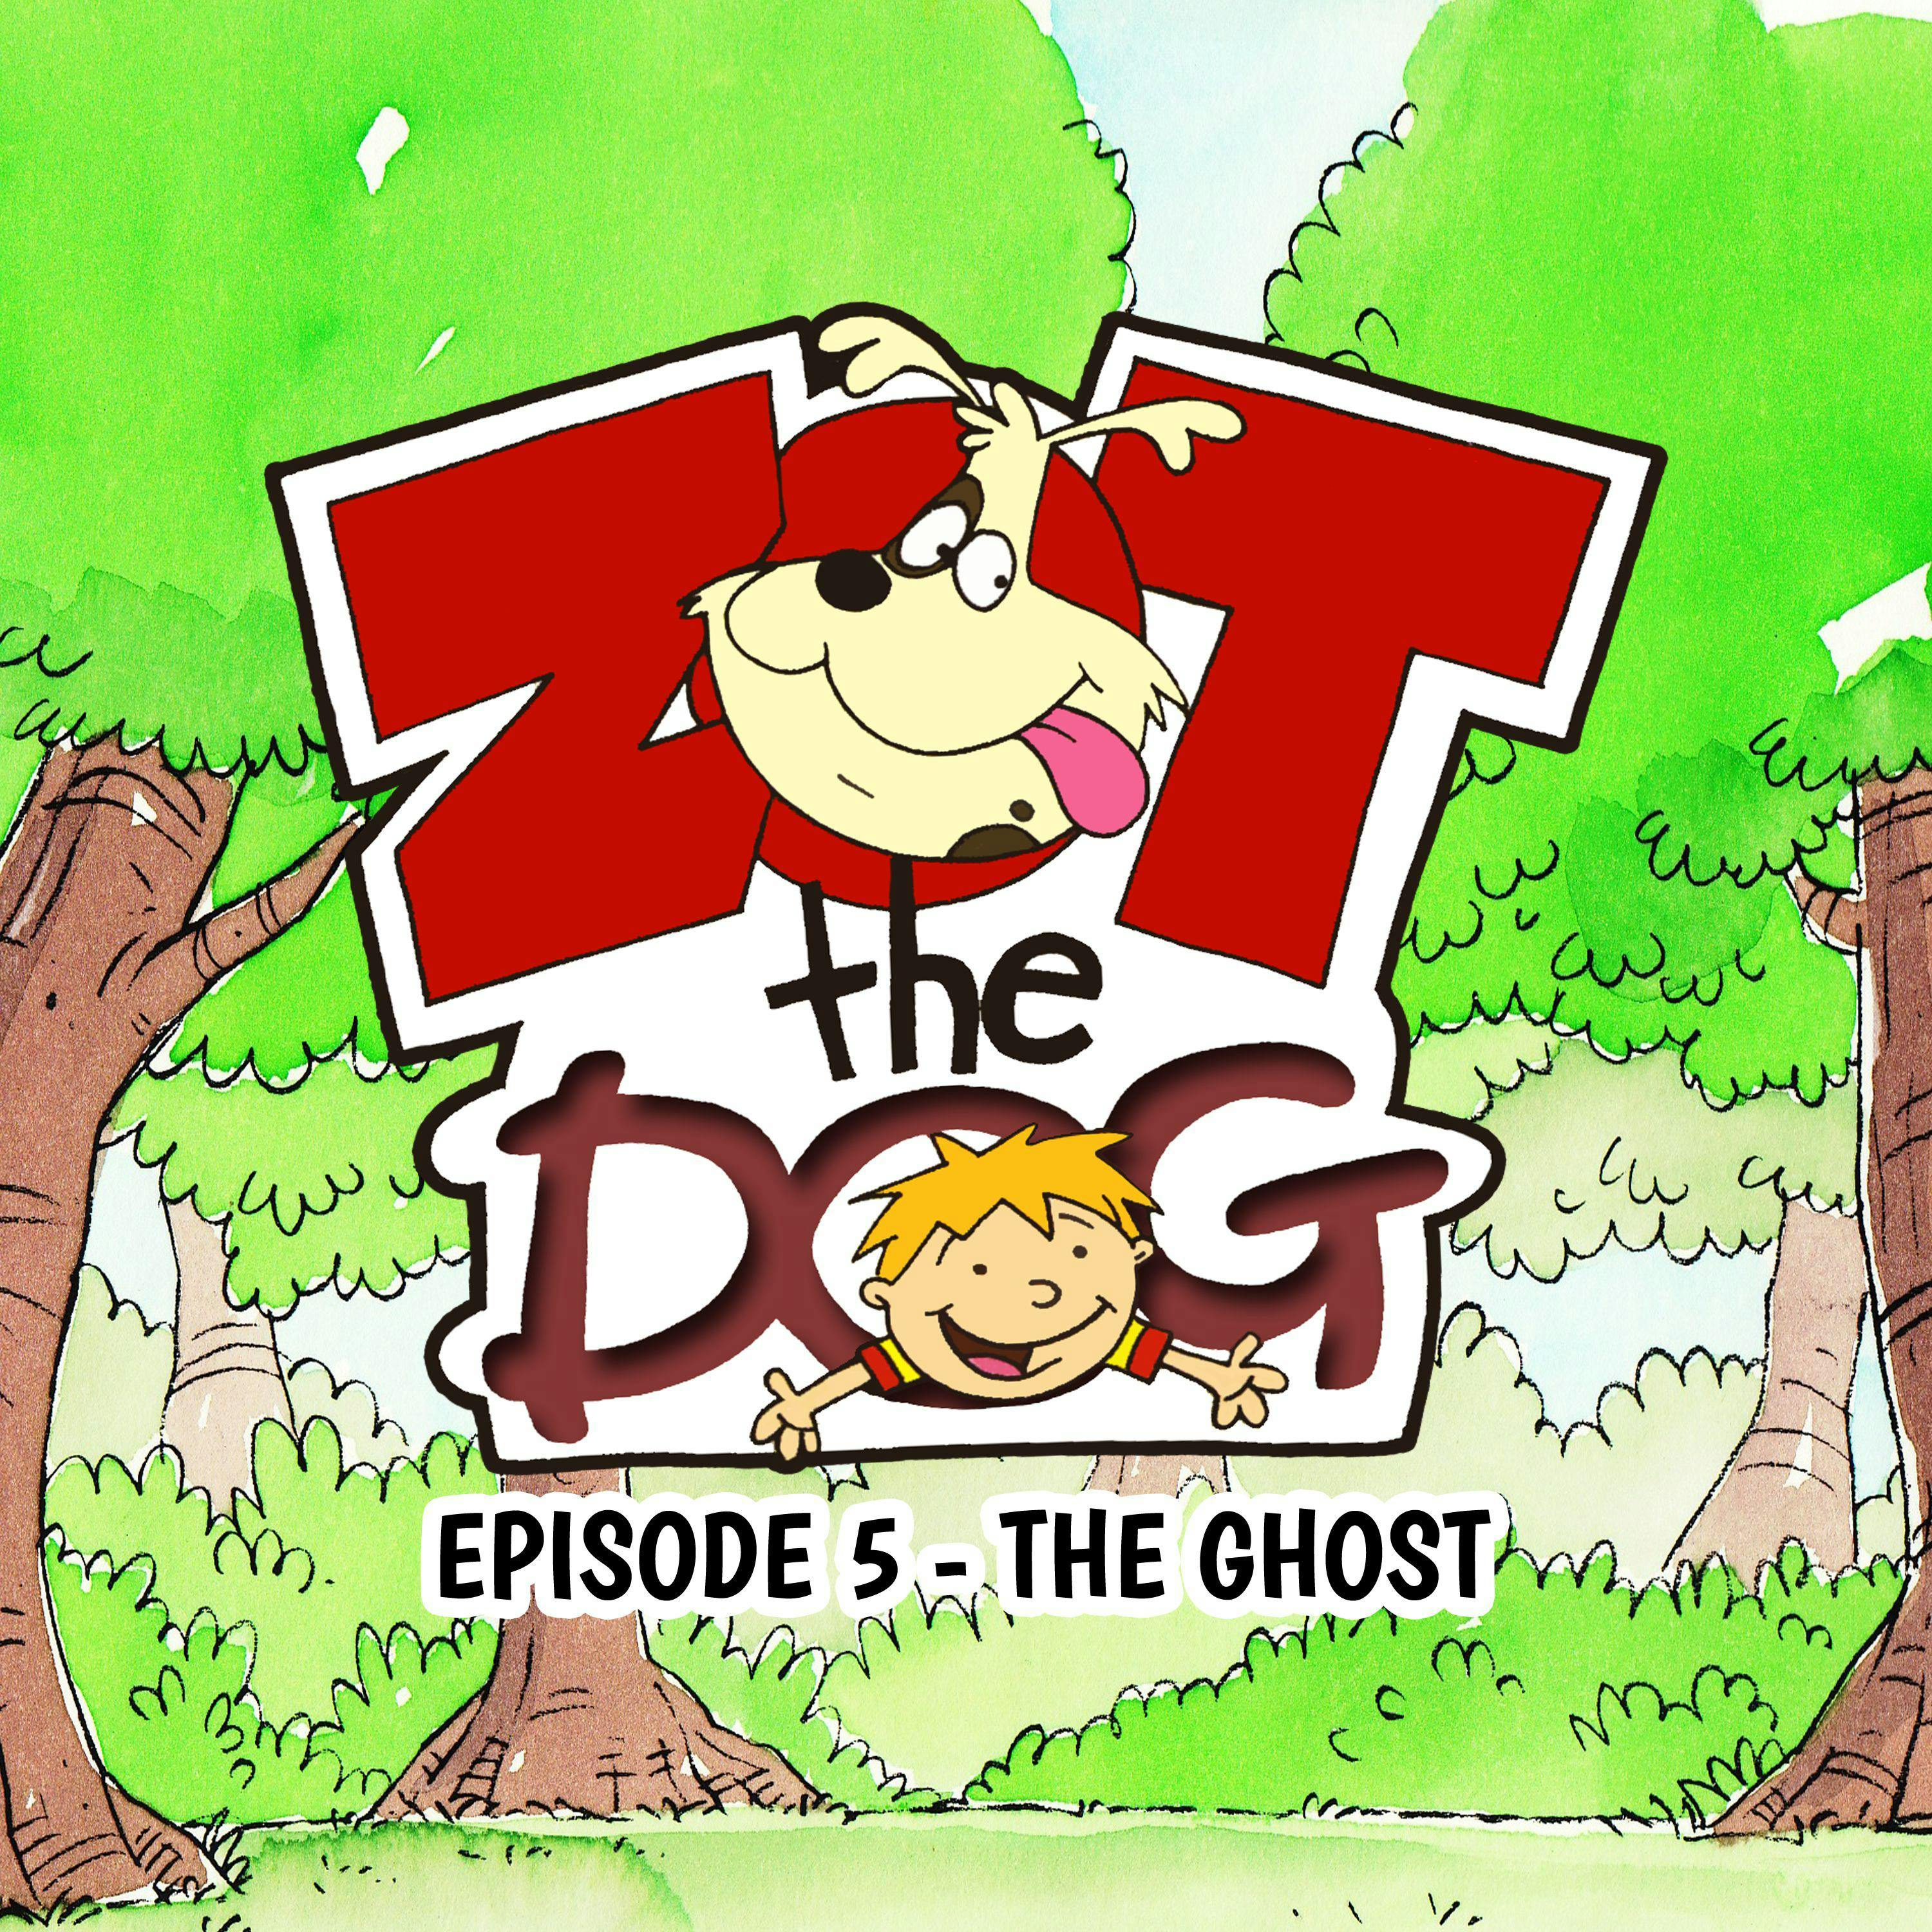 Zot the Dog: Episode 5 - The Ghost - undefined